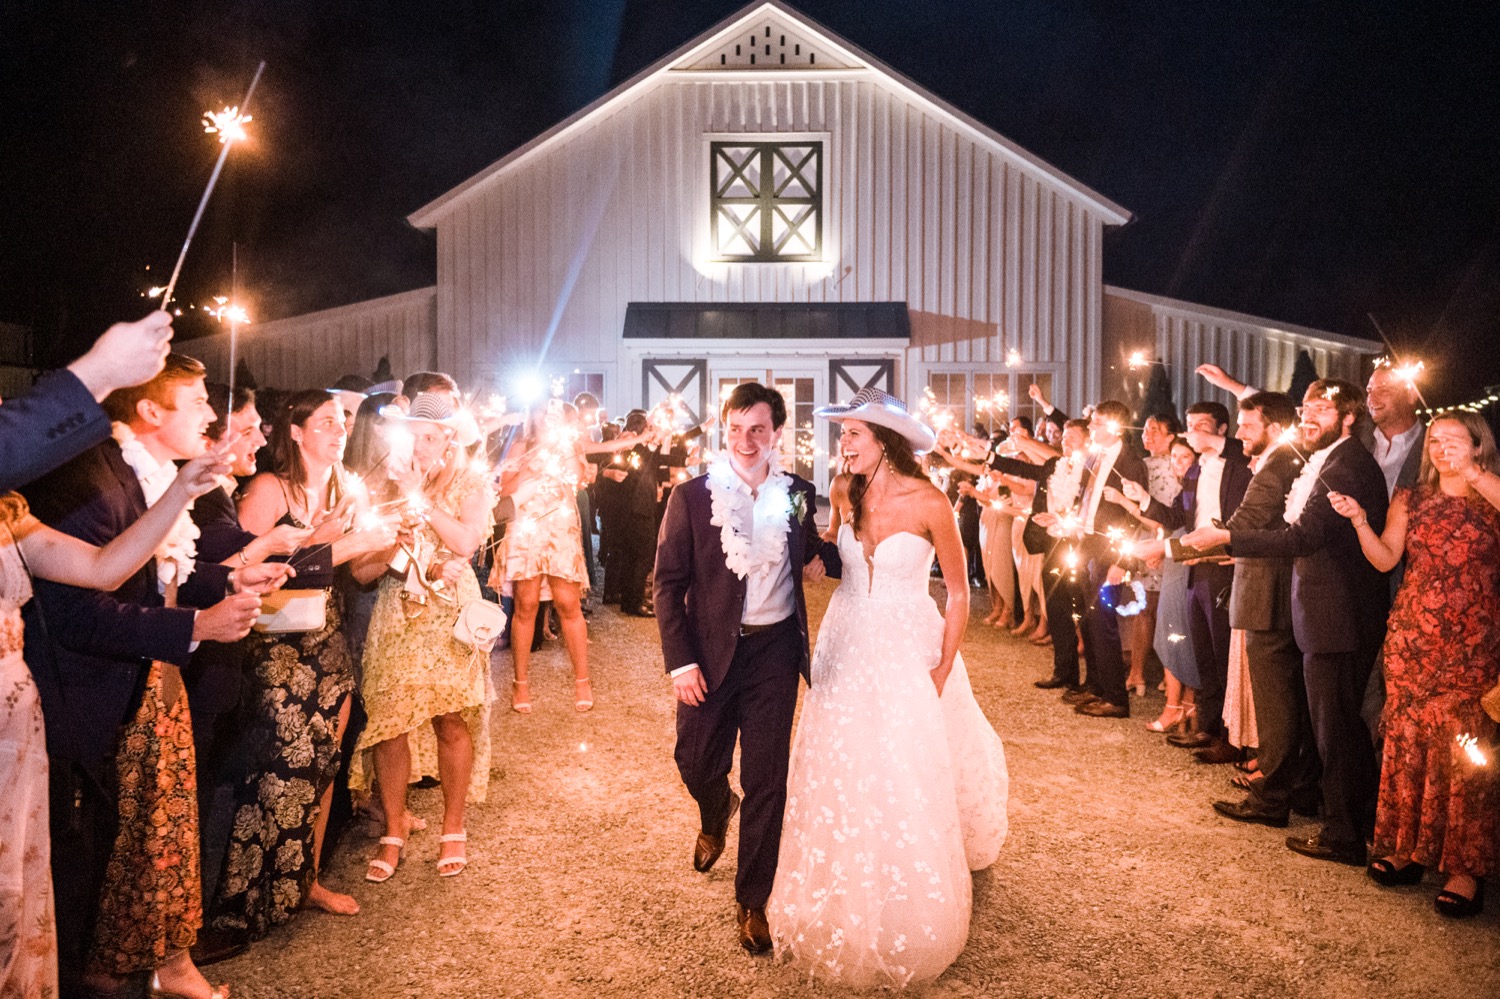 sparkler sendoff with the bride and groom walking through their friends and family with the King Family Vineyard barn behind them